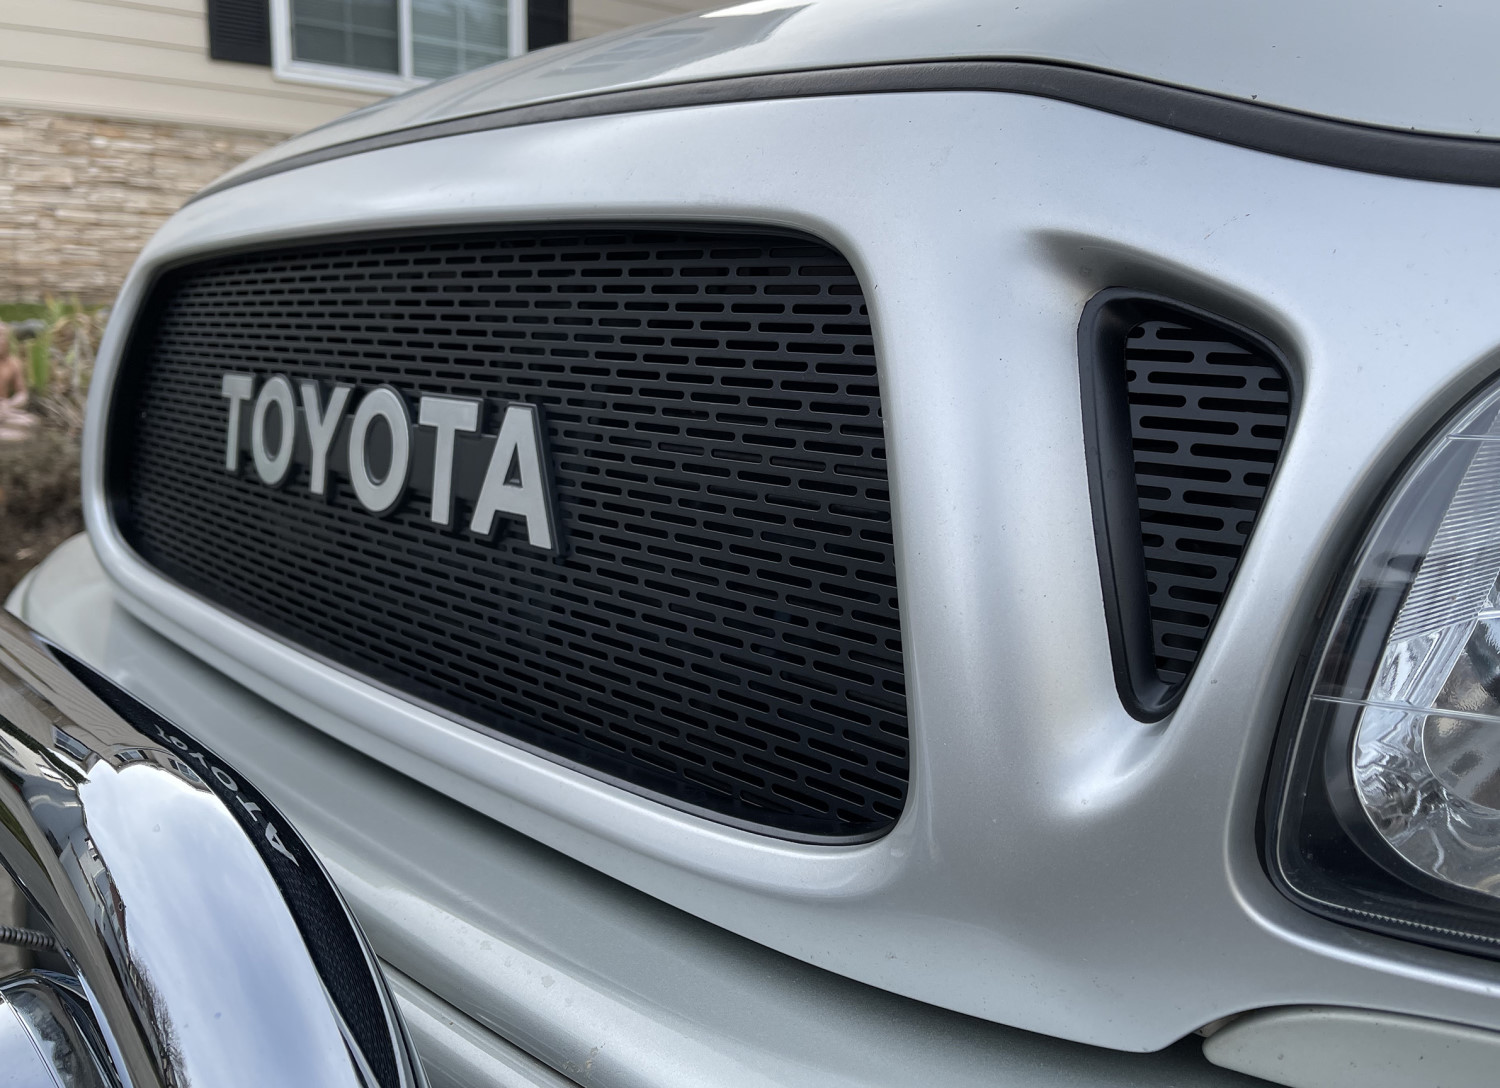 2001 - 2004 Toyota Tacoma Grill Mesh With Toyota Emblem #4